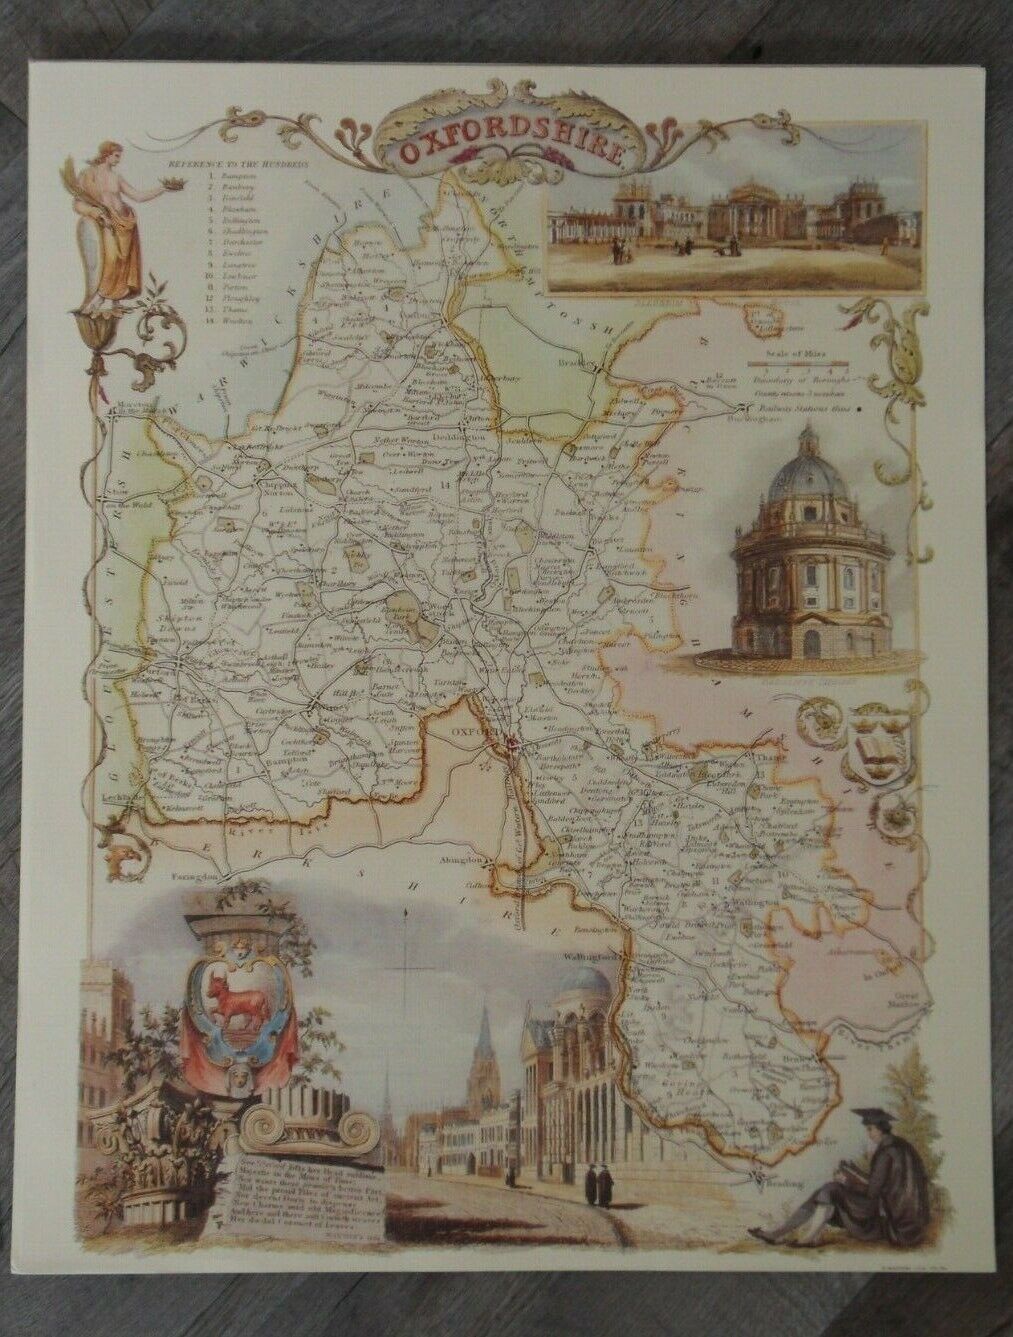 Vintage Oxfordshire Antique Wrightsons Reprint Map Thomas Moule from c.1840s VGC